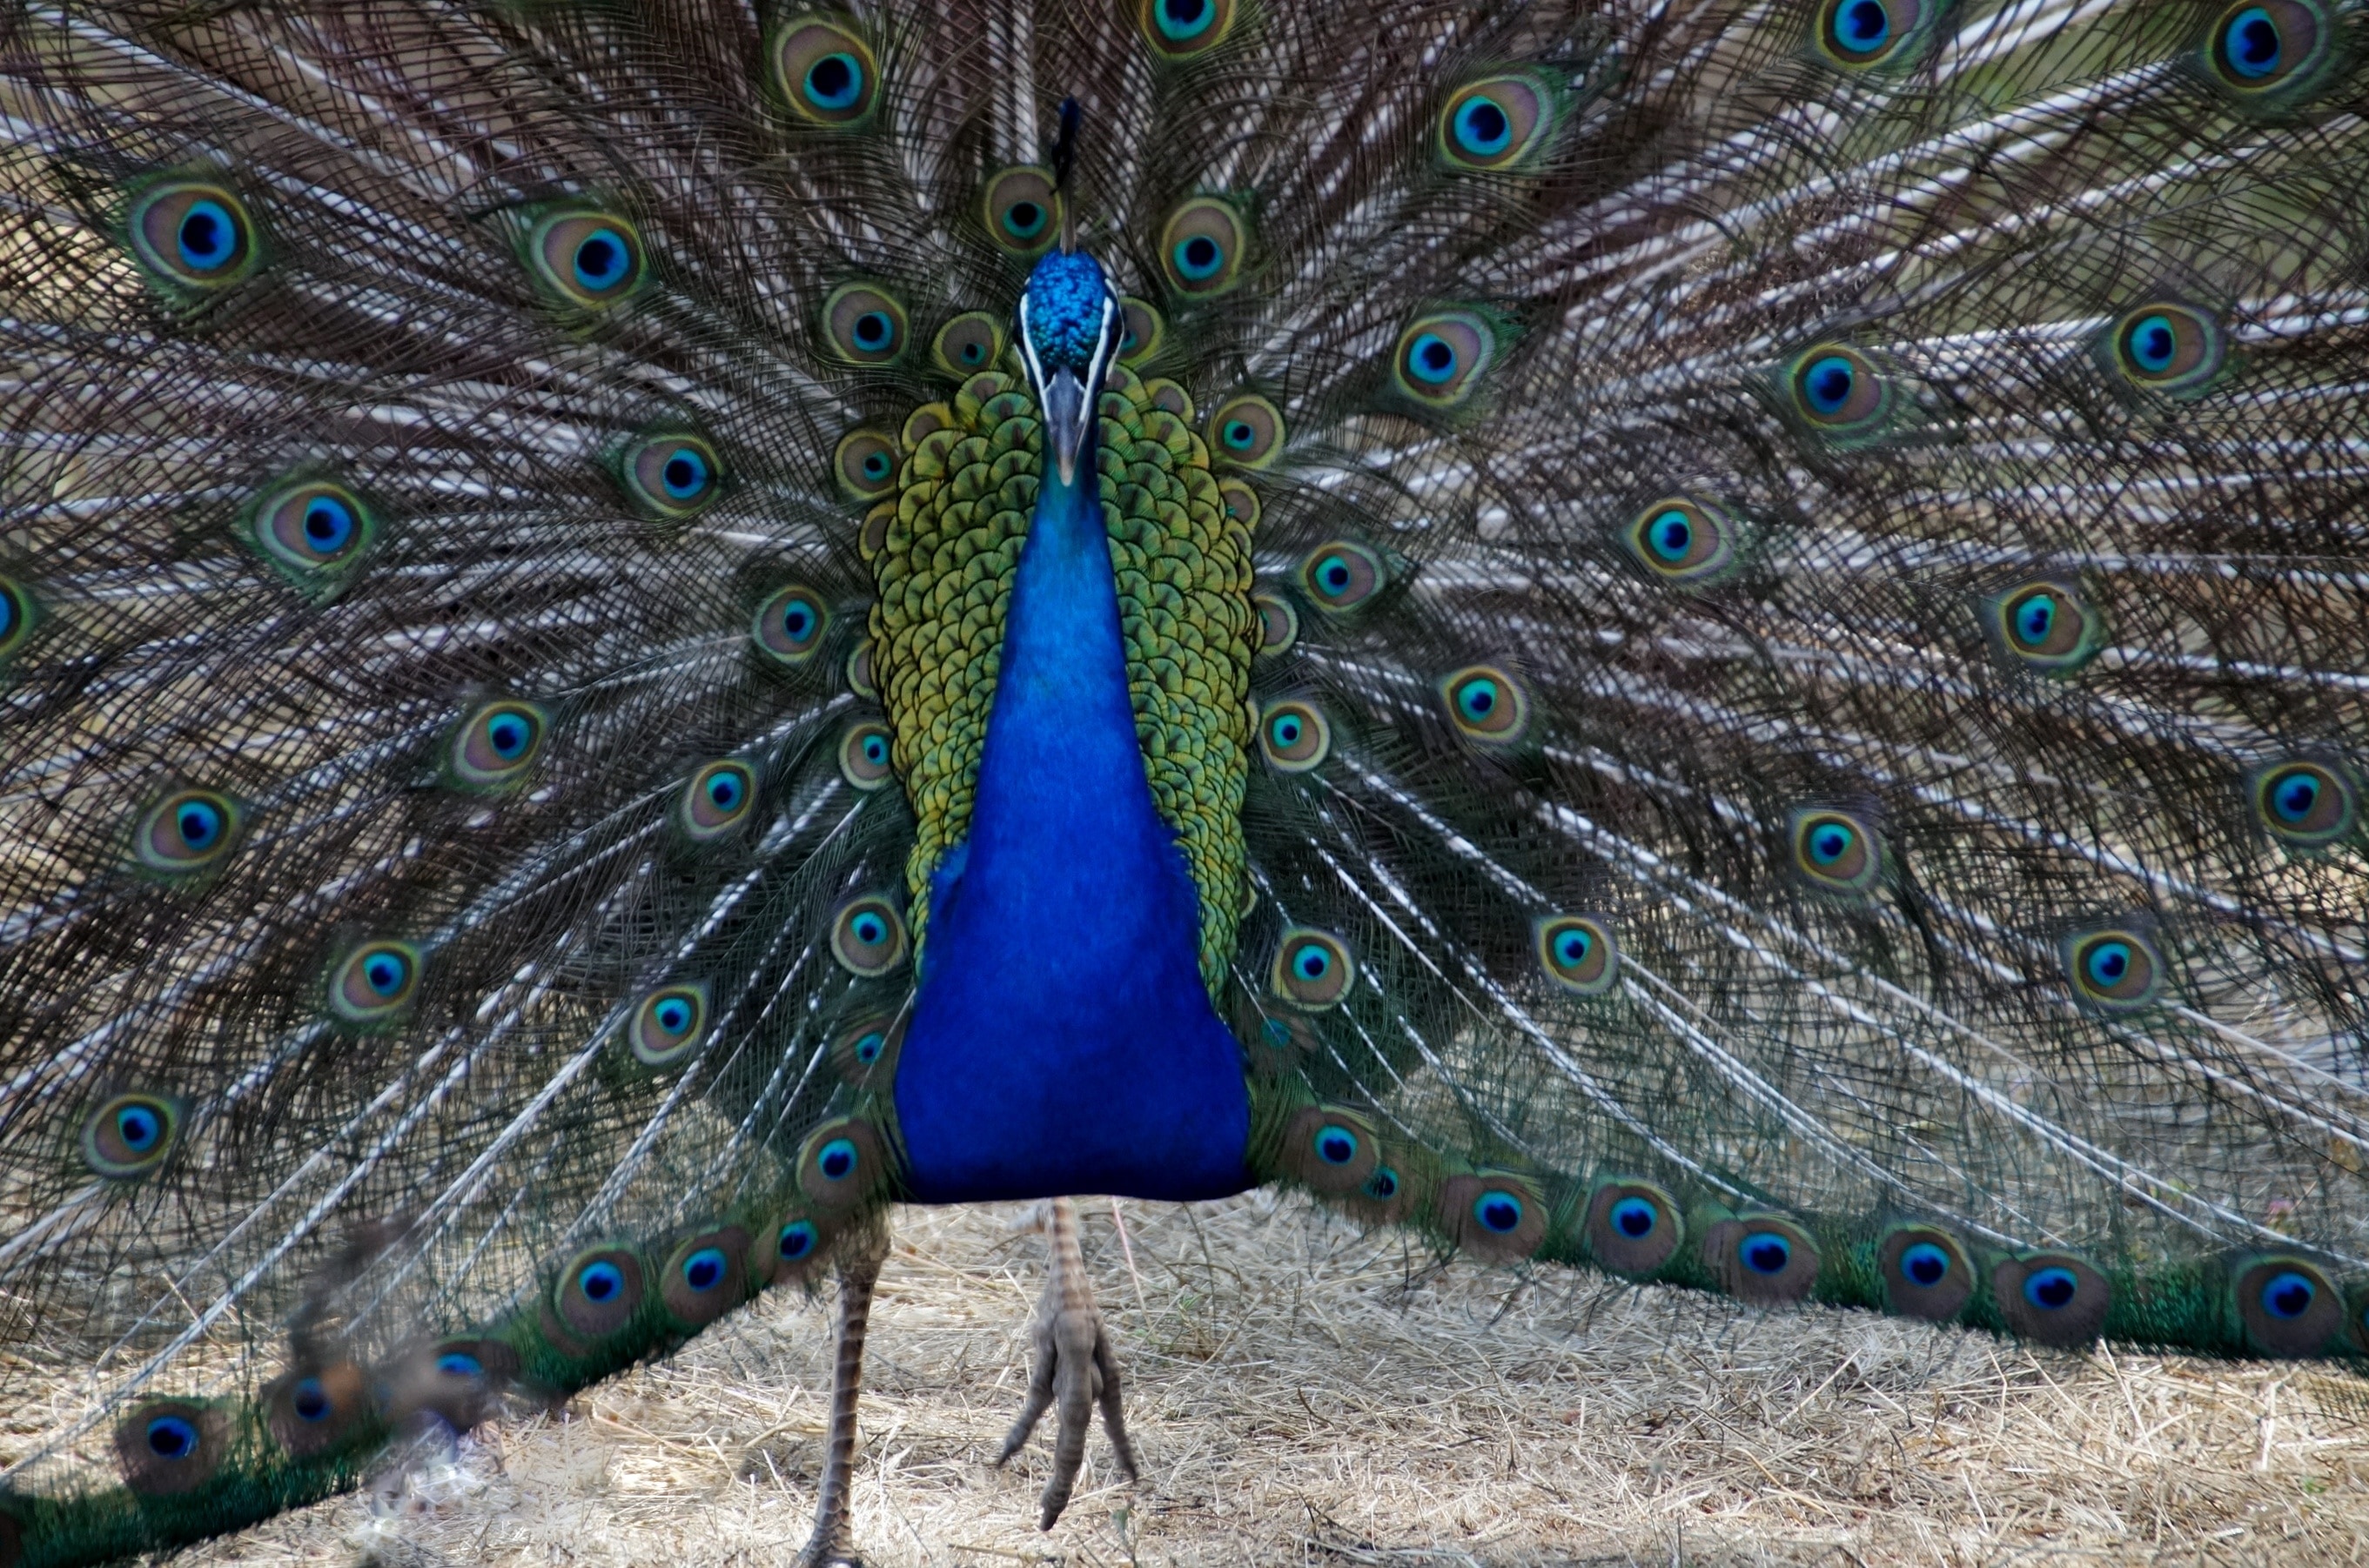 Peacock, Male, Blue, Peacock Feather, peacock, peacock feather